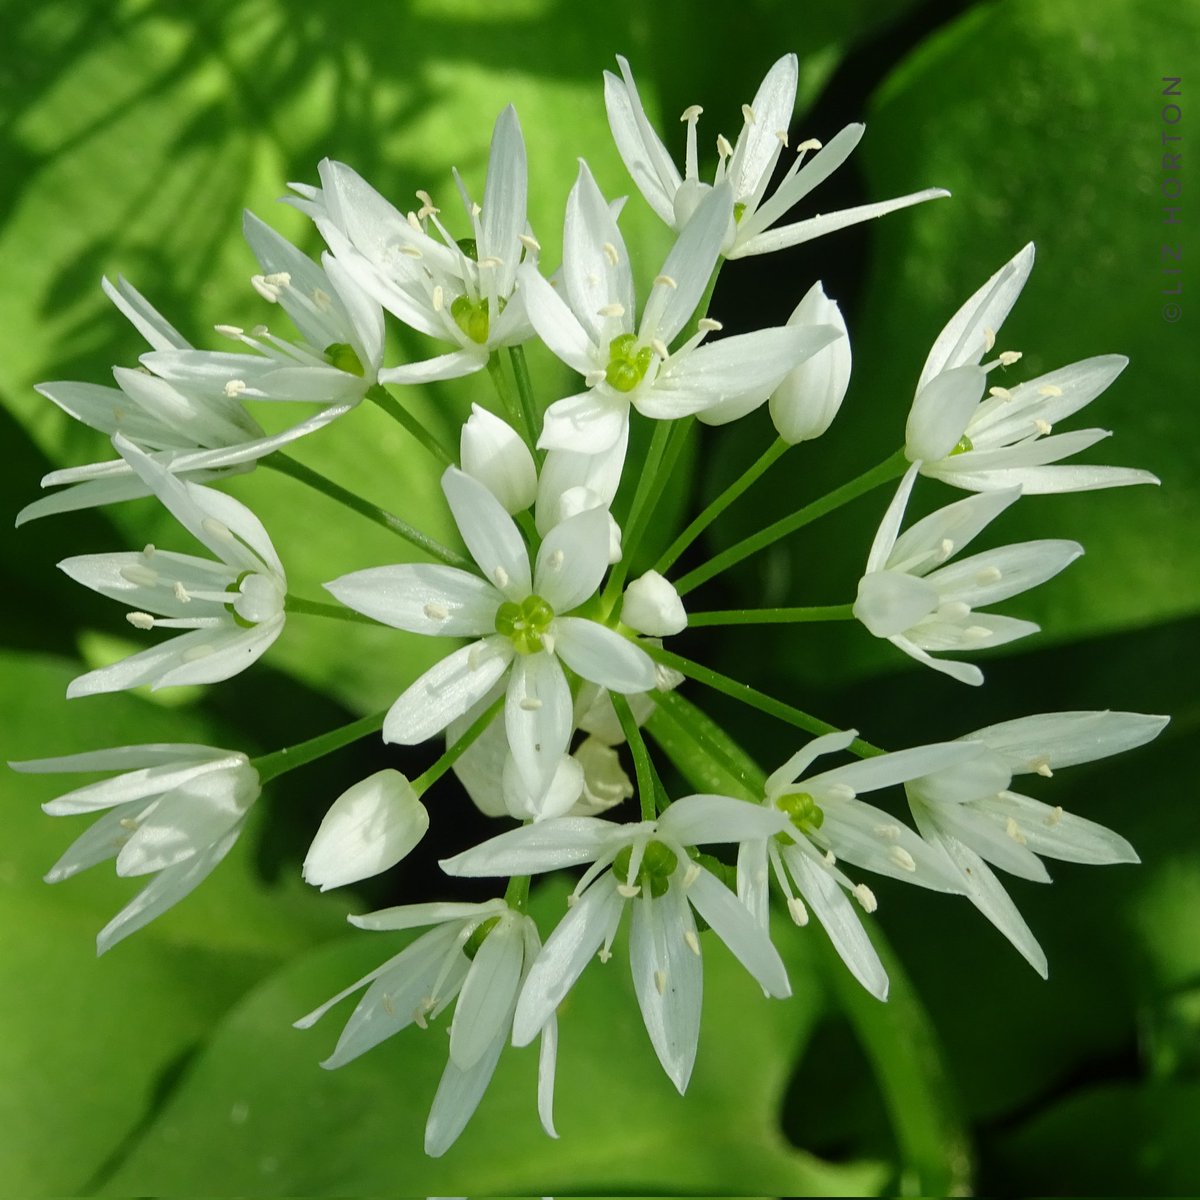 Soothing and serene..
Wild Garlic/Allium ursinum
aka Ramsons & Cowleek
'I cannot bear the noise!
For Nature's voice is never loud;
I seek for #quiet joys.'
John Clare #quote 
#thoughtoftheday
#nature #spring #flowers #photography
Have a relaxing day..
#art #naturelovers .. 🤍🌱🕊